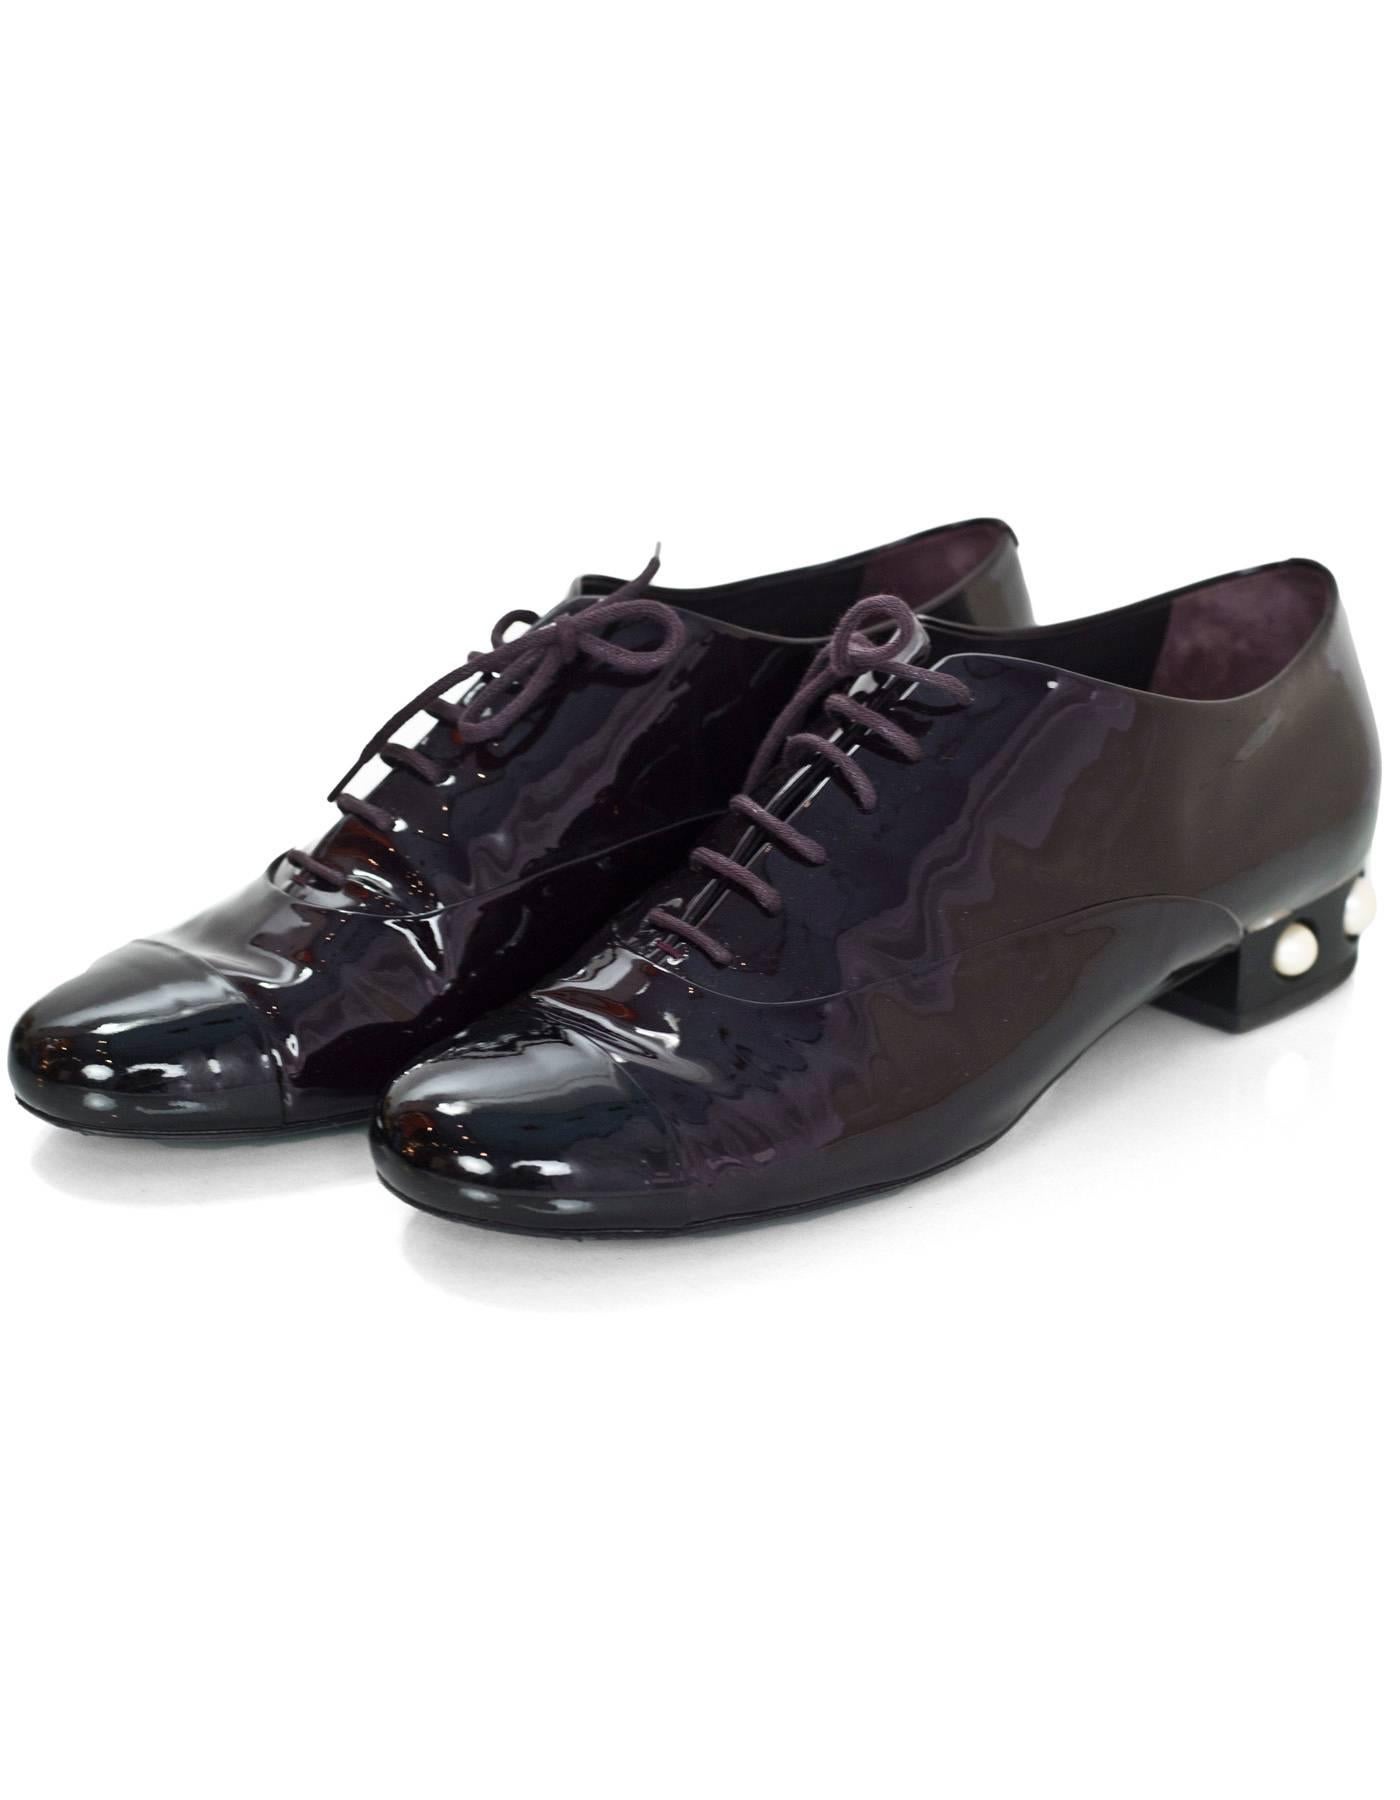 Chanel Burgundy Patent & Pearl CC Oxford Shoes Sz 41

Features black cap-toes and Faux pearls at heels

Made In: Italy
Color: Burgundy, black
Materials: Patent leather
Closure/Opening: Lace tie closure
Sole Stamp: CC Made in Italy 41
Retail Price: